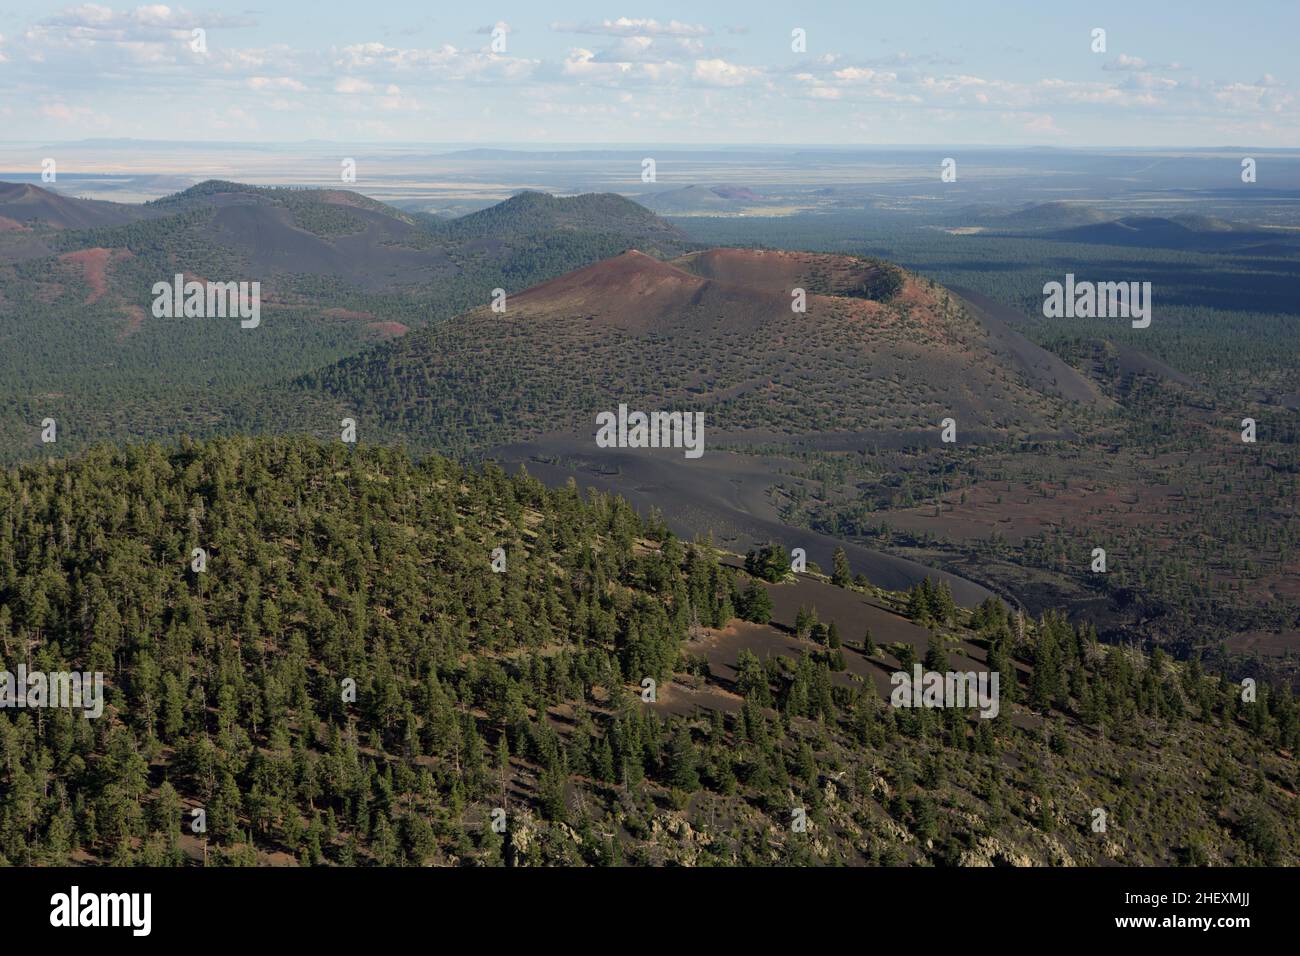 Aerial view of the Sunset Crater cinder cone volcano and Bonito Lava Flow from the O'Leary Peak, north of Flagstaff, AZ, USA Stock Photo